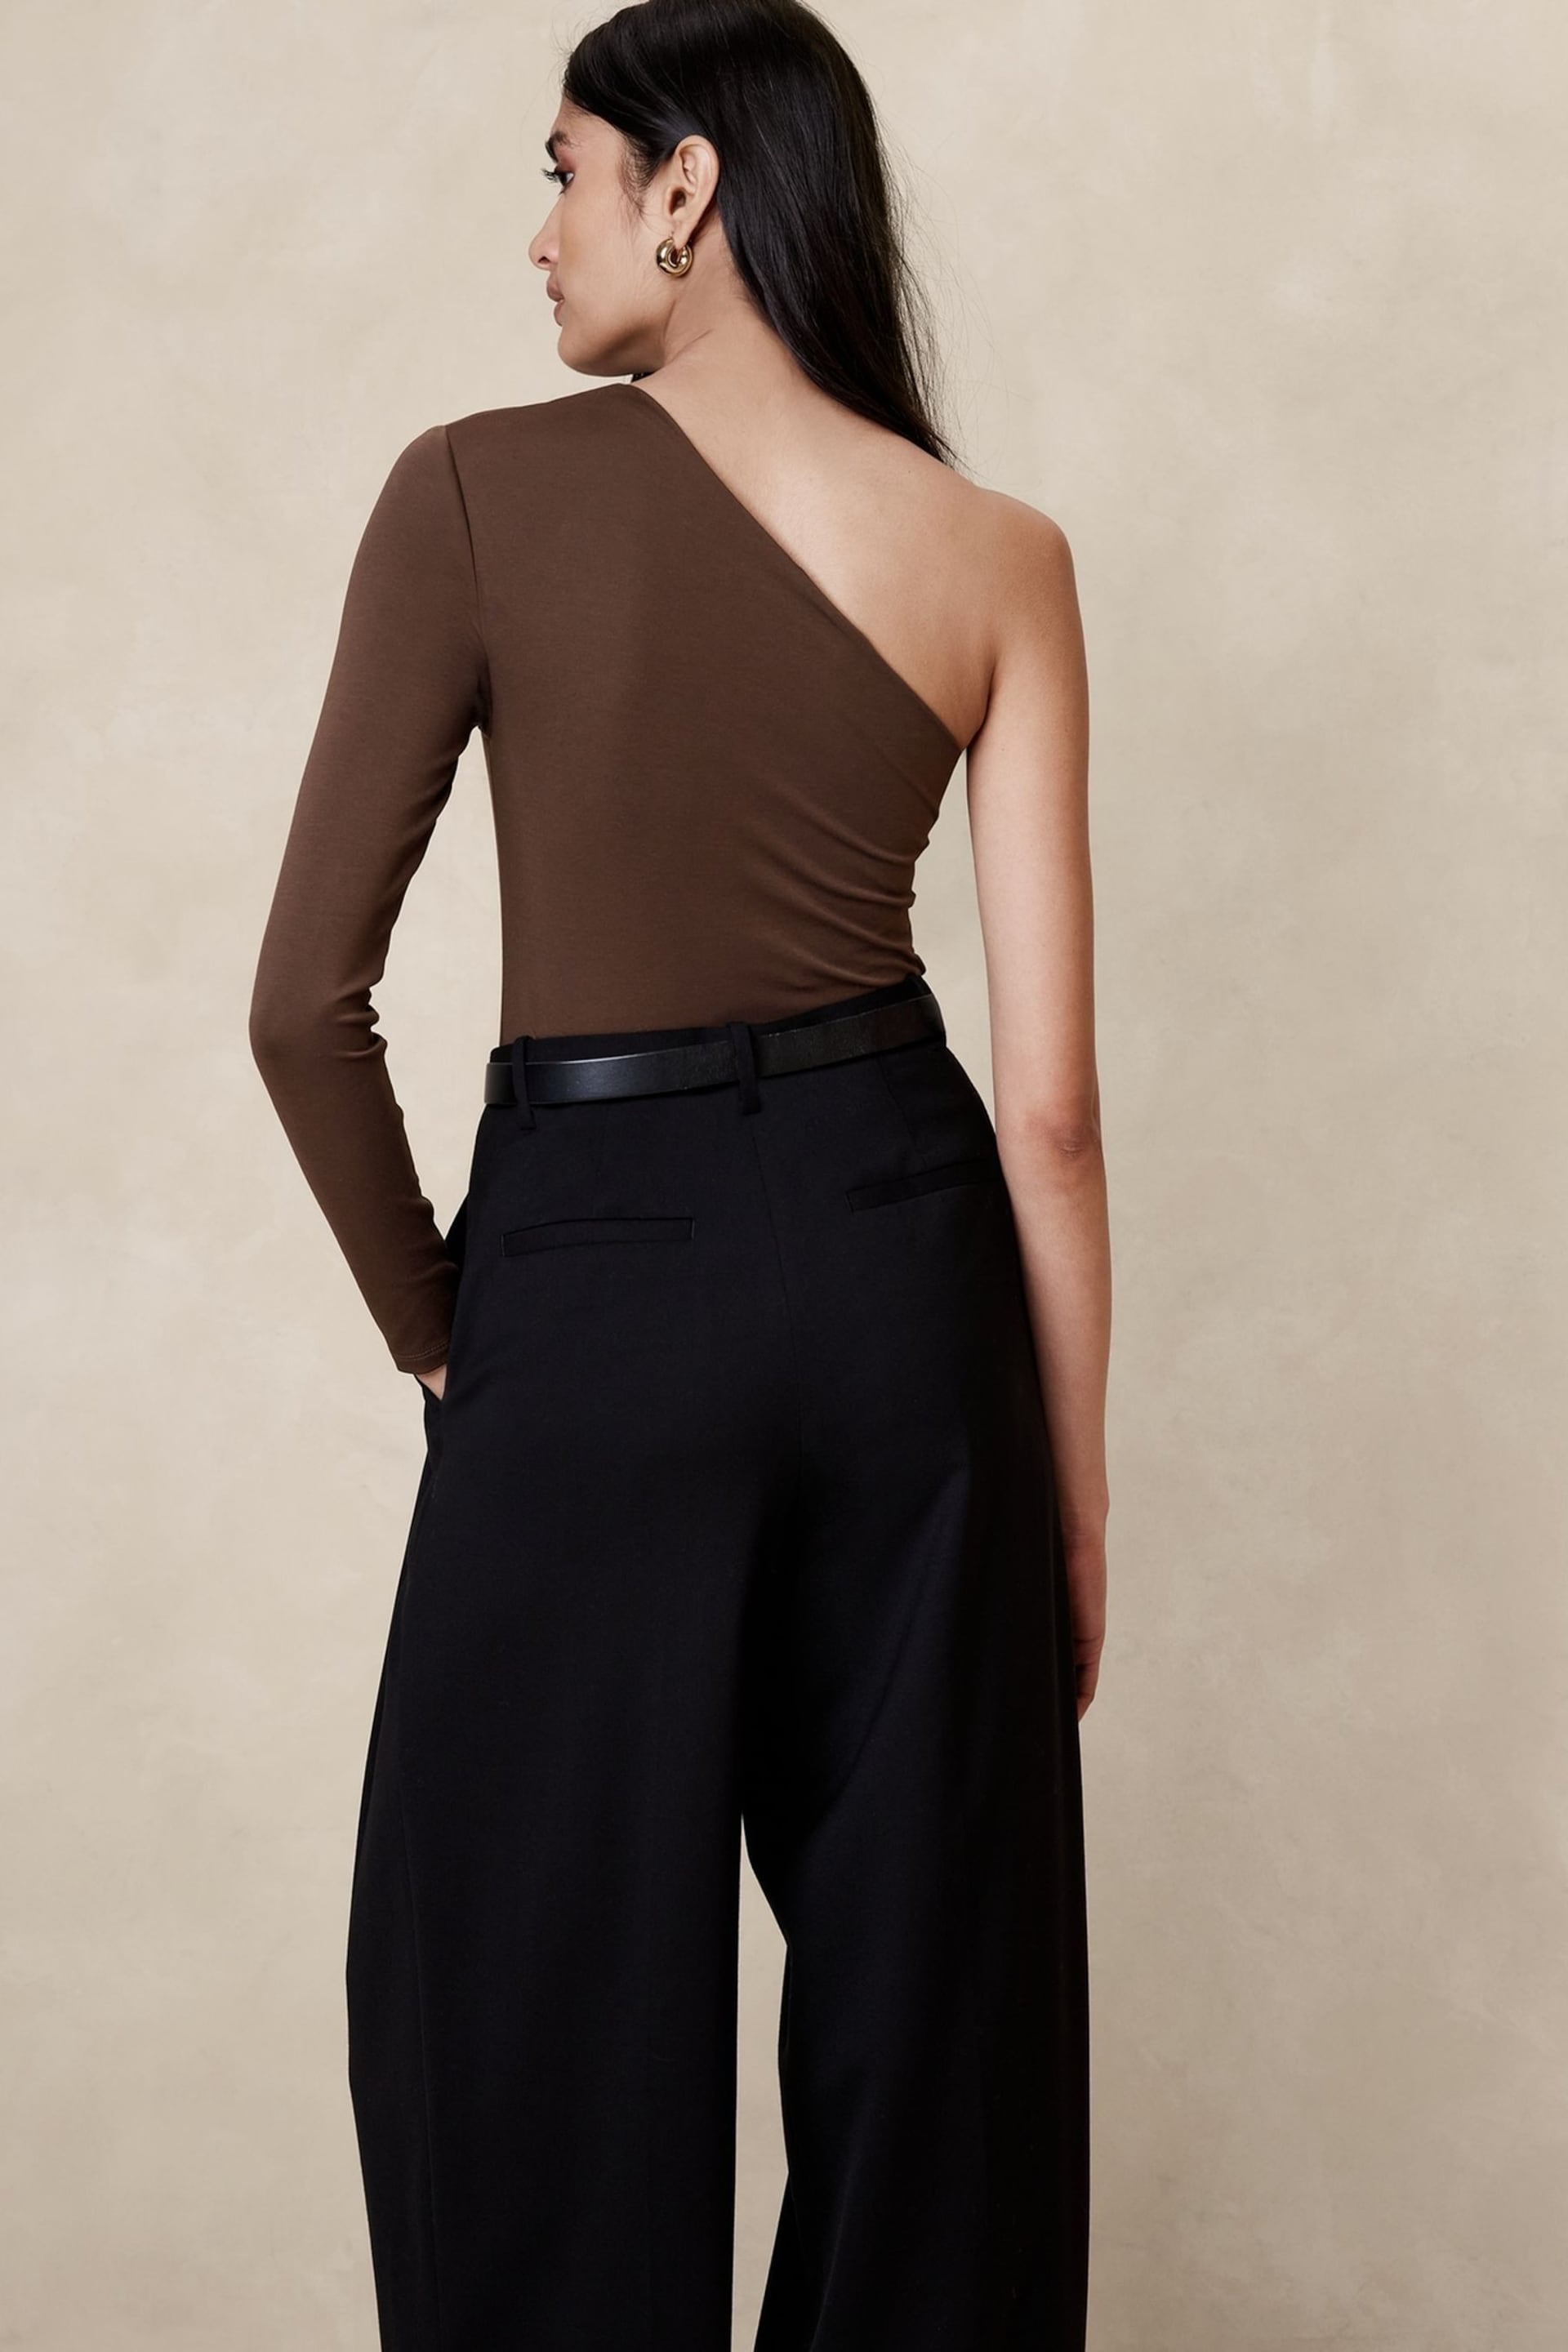 Banana Republic Brown Cotton-Modal One-Sleeve Top - Image 2 of 4